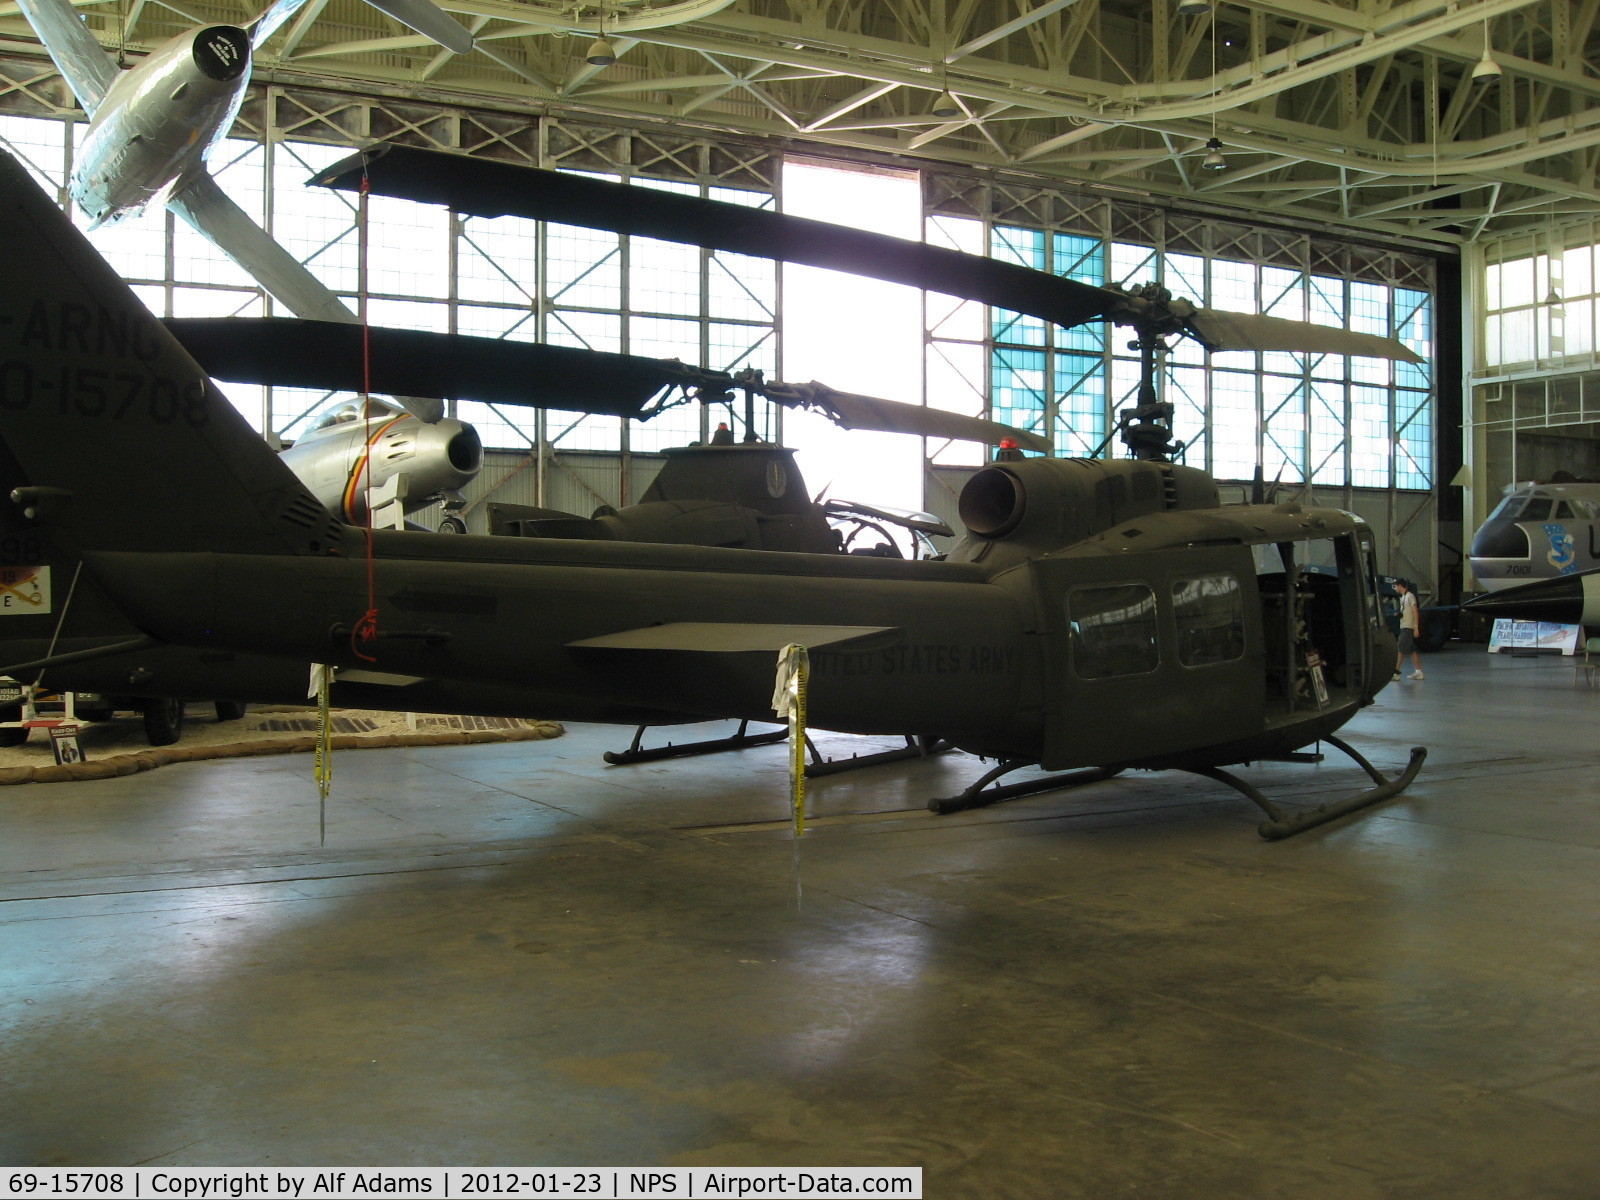 69-15708, 1969 Bell UH-1H Iroquois C/N 11996, Displayed at the Pacific Aviation Museum, Honolulu, Hawaii in 2012.